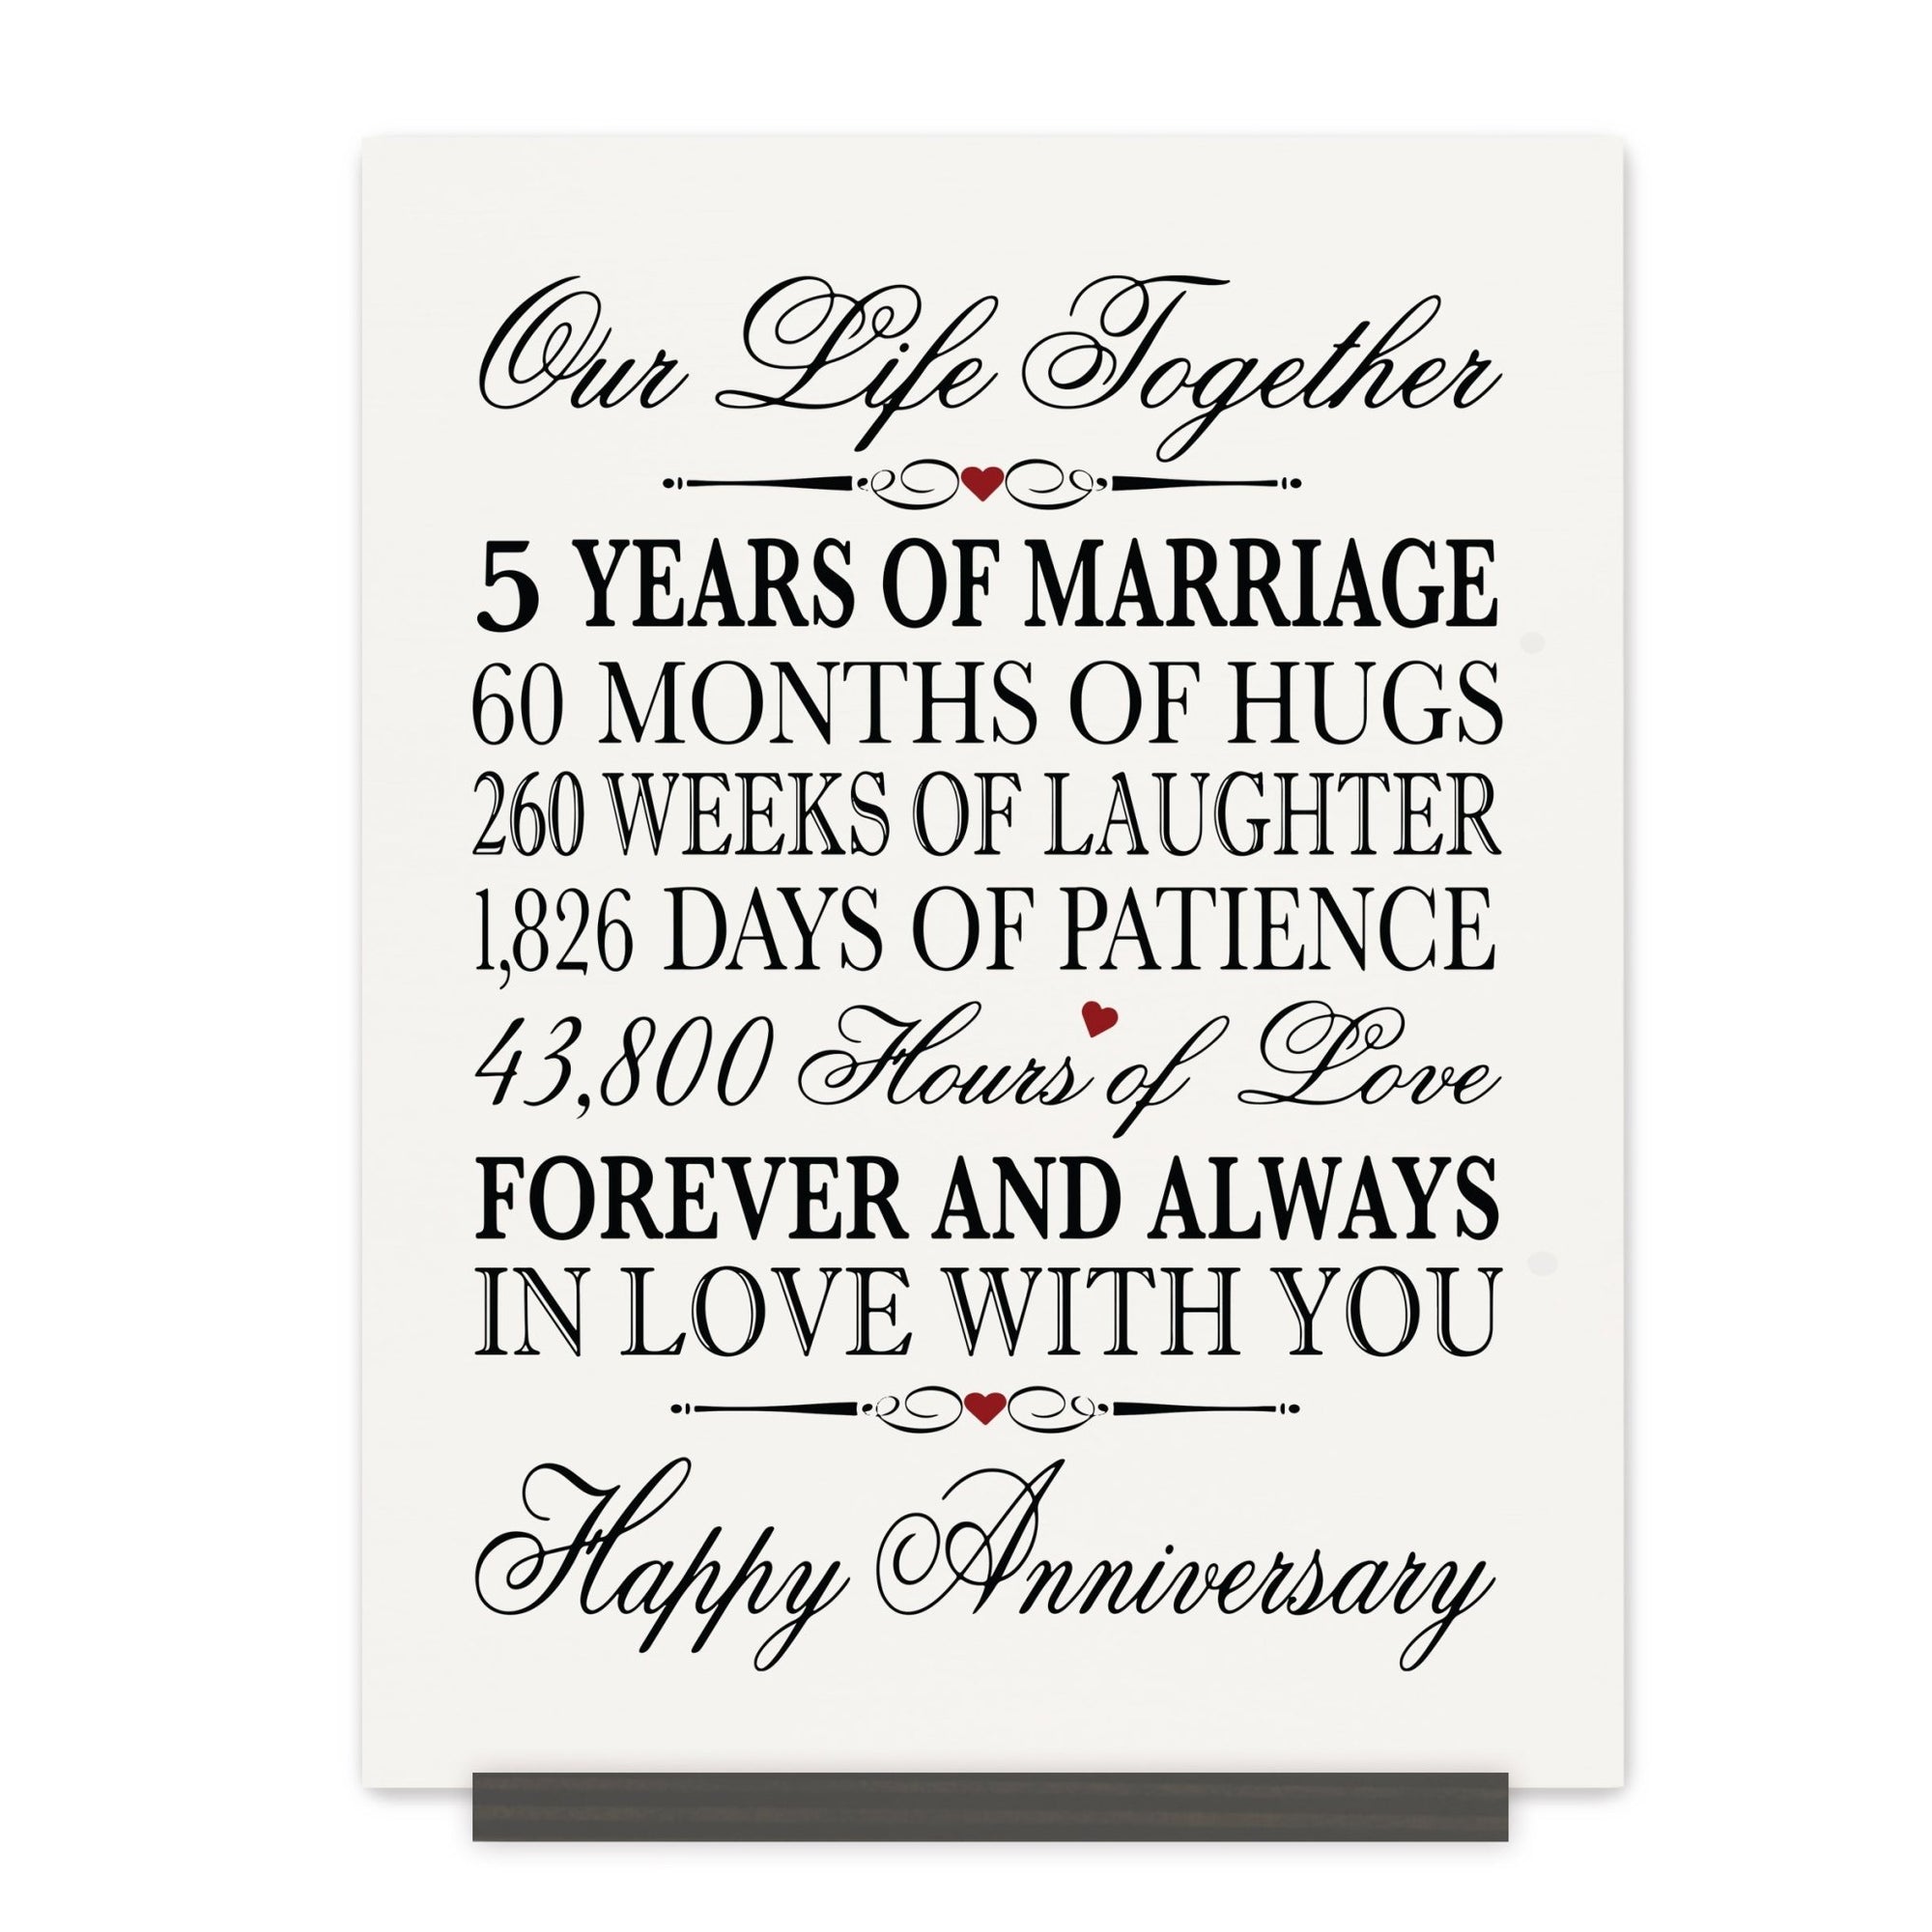 5th Wedding Anniversary Wall Plaque - Our Life Together - LifeSong Milestones